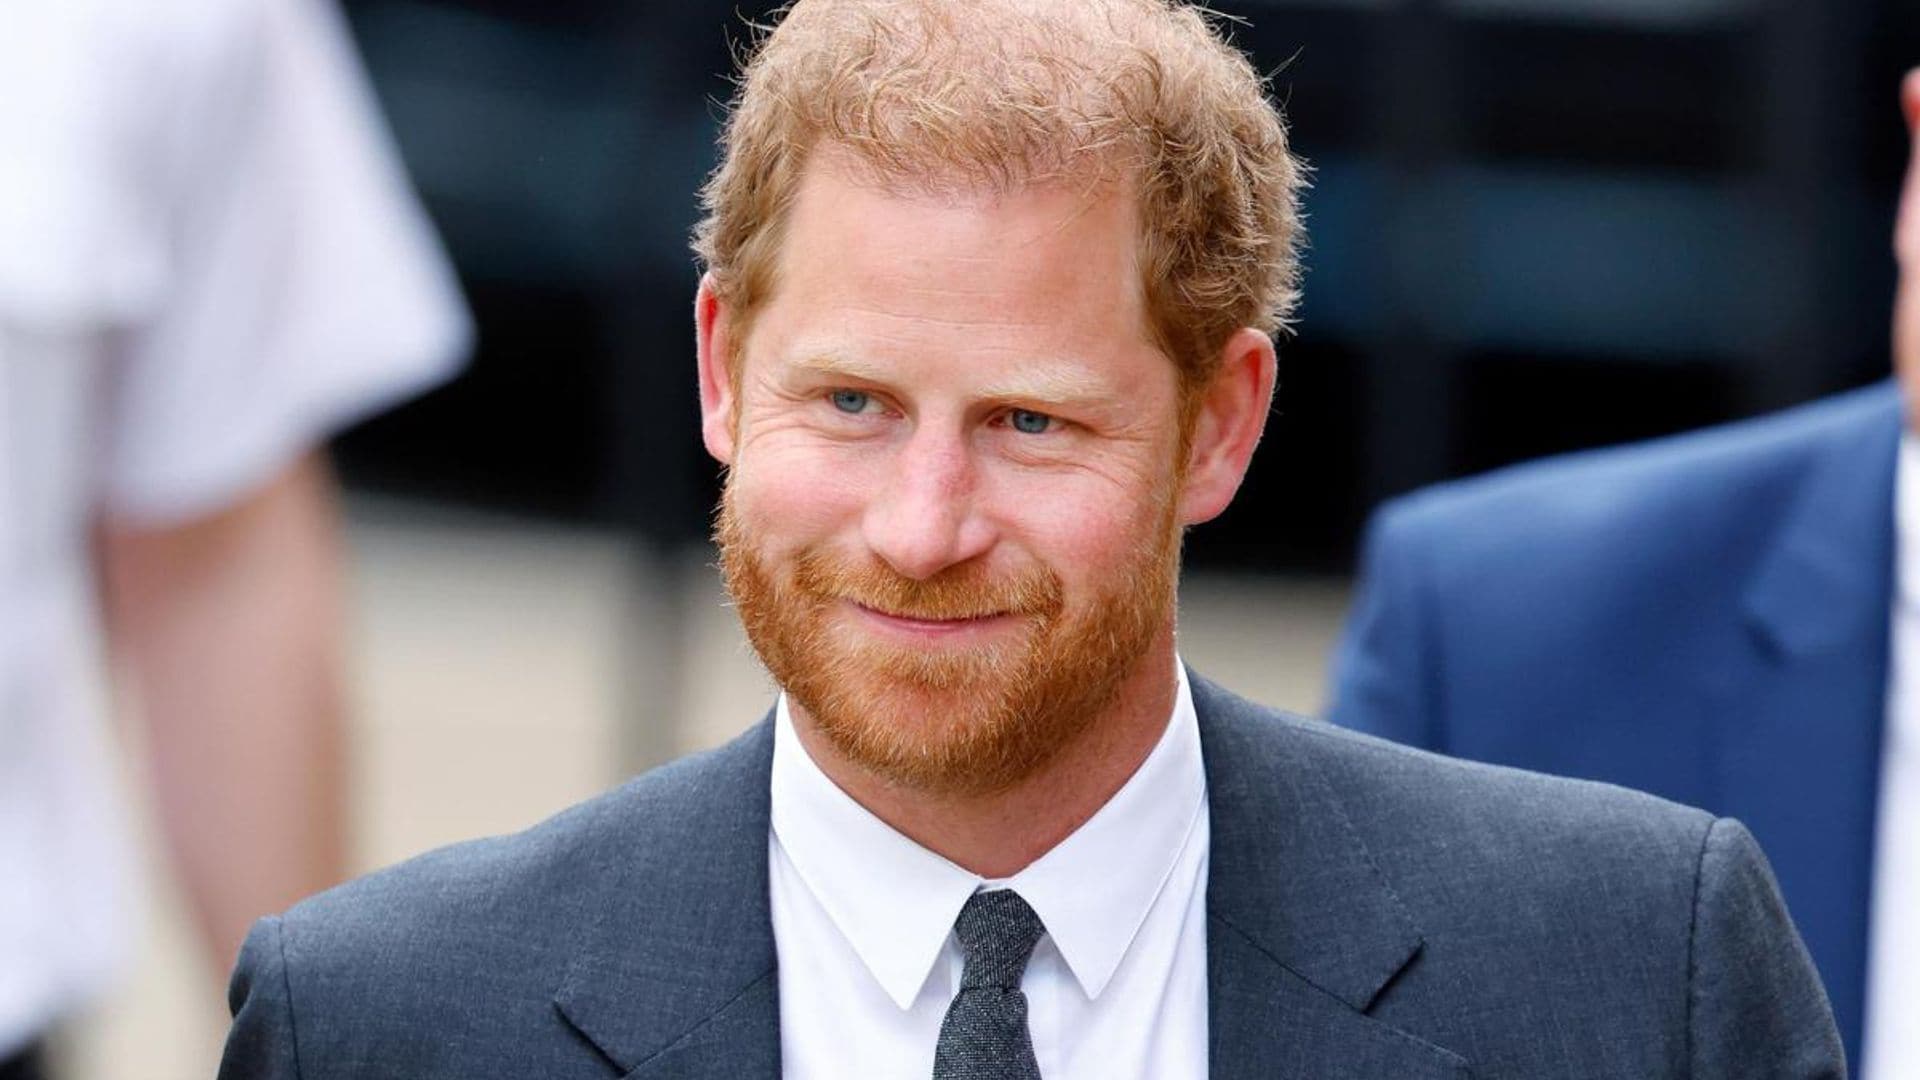 Prince Harry leaves the UK day after seeing dad King Charles